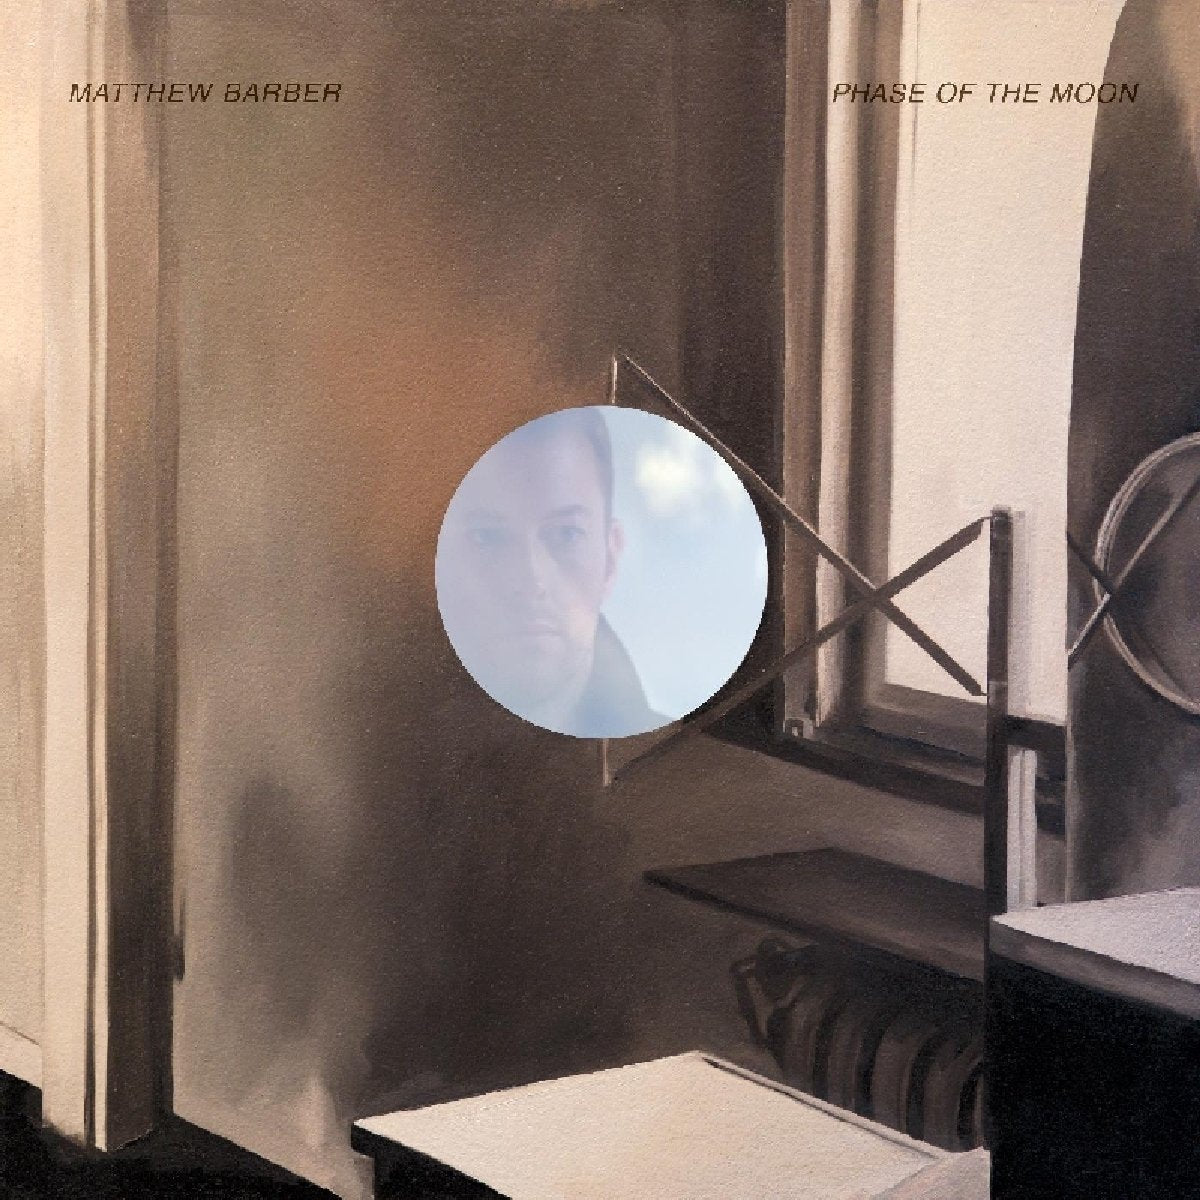 Barber, Matthew/Phase Of The Moon [LP]